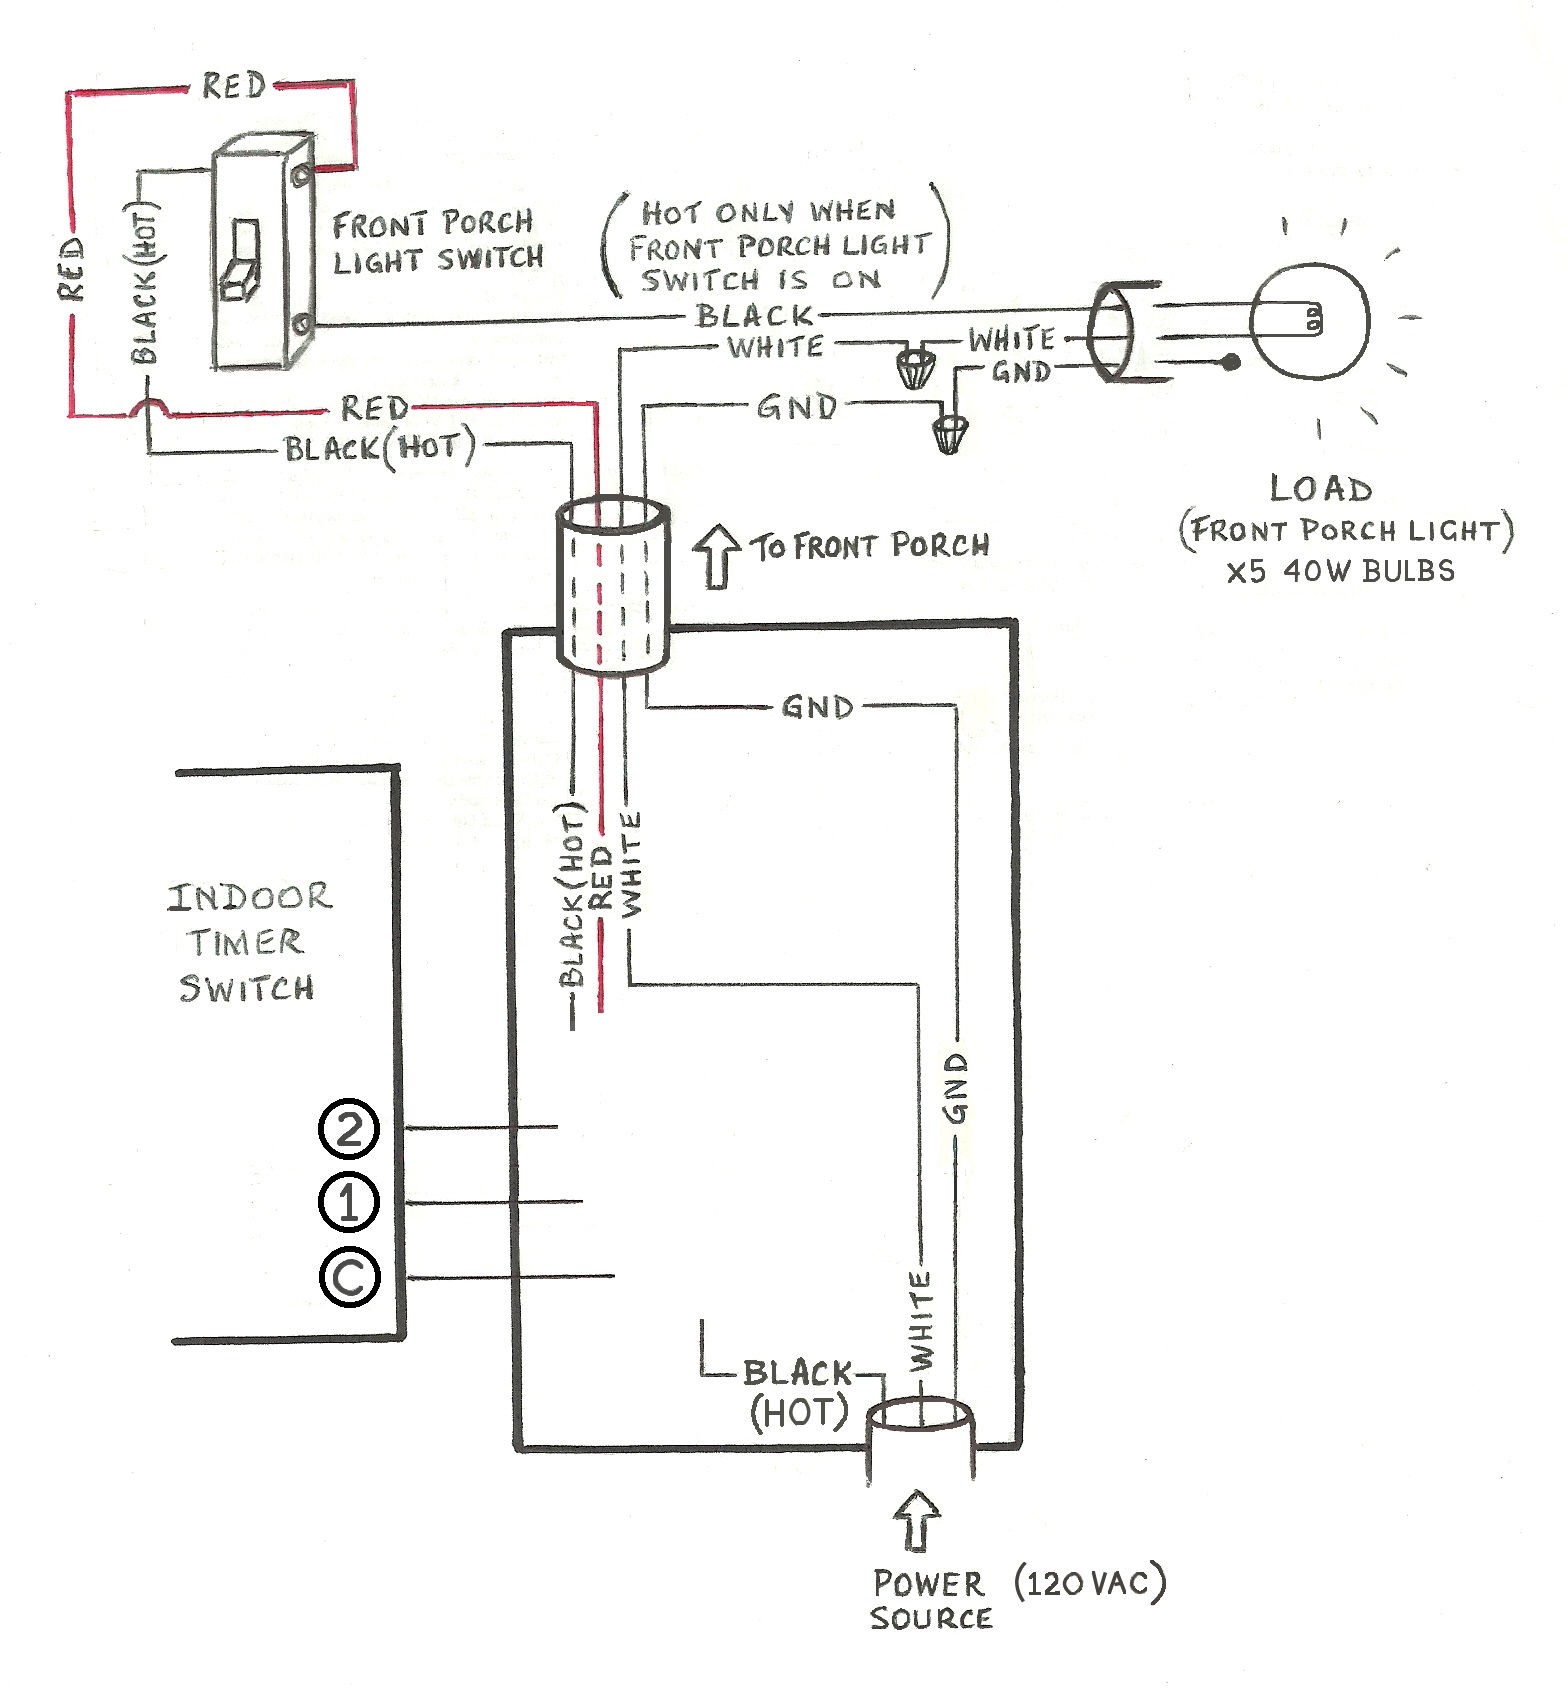 porch light wiring diagram Collection Need Help Wiring A 3 Way Honeywell Digital Timer Switch